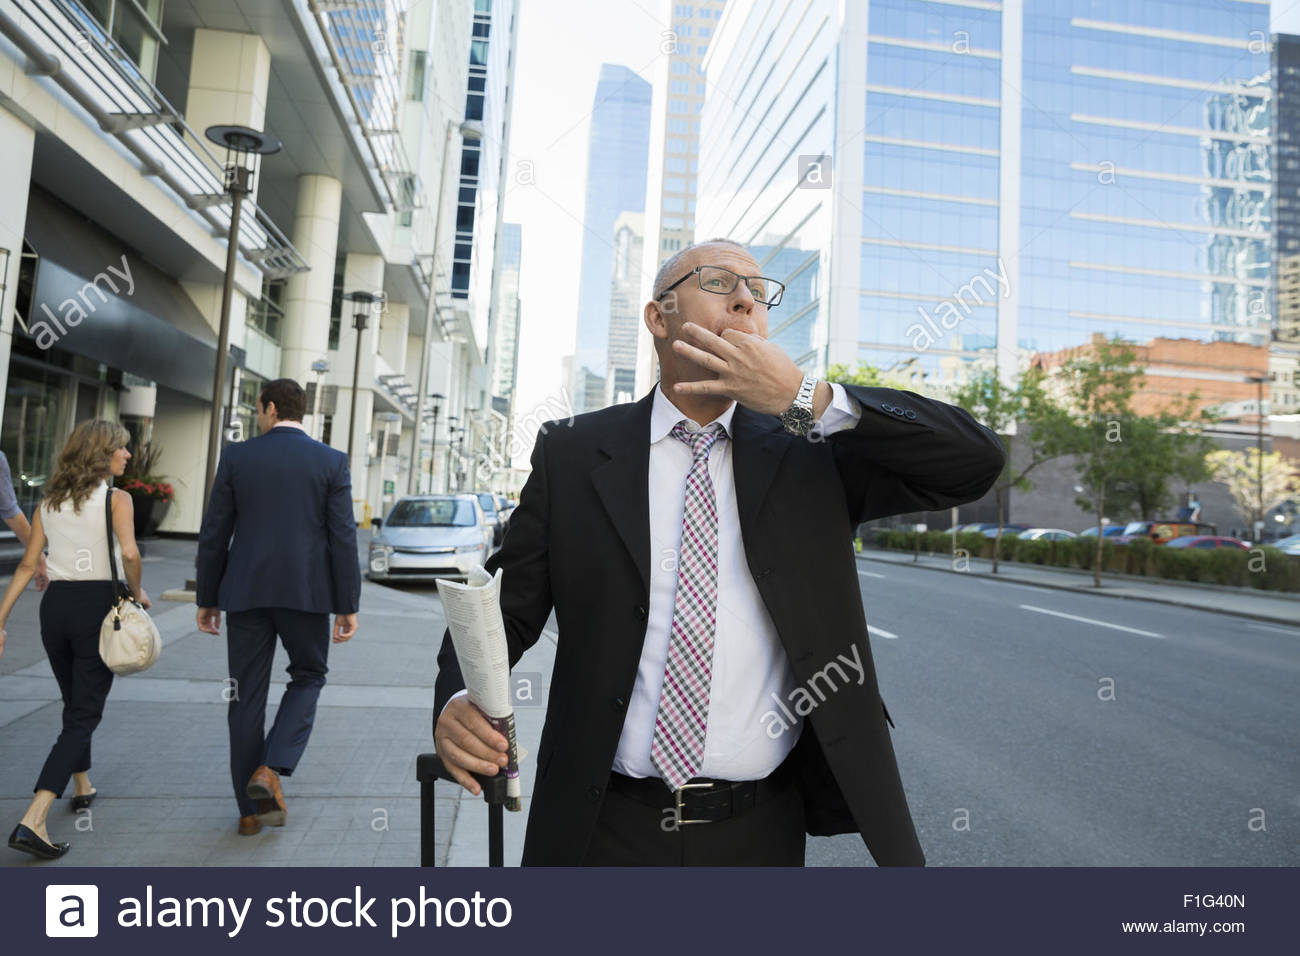 Businessman whistling hailing taxi on city street Stock Photo